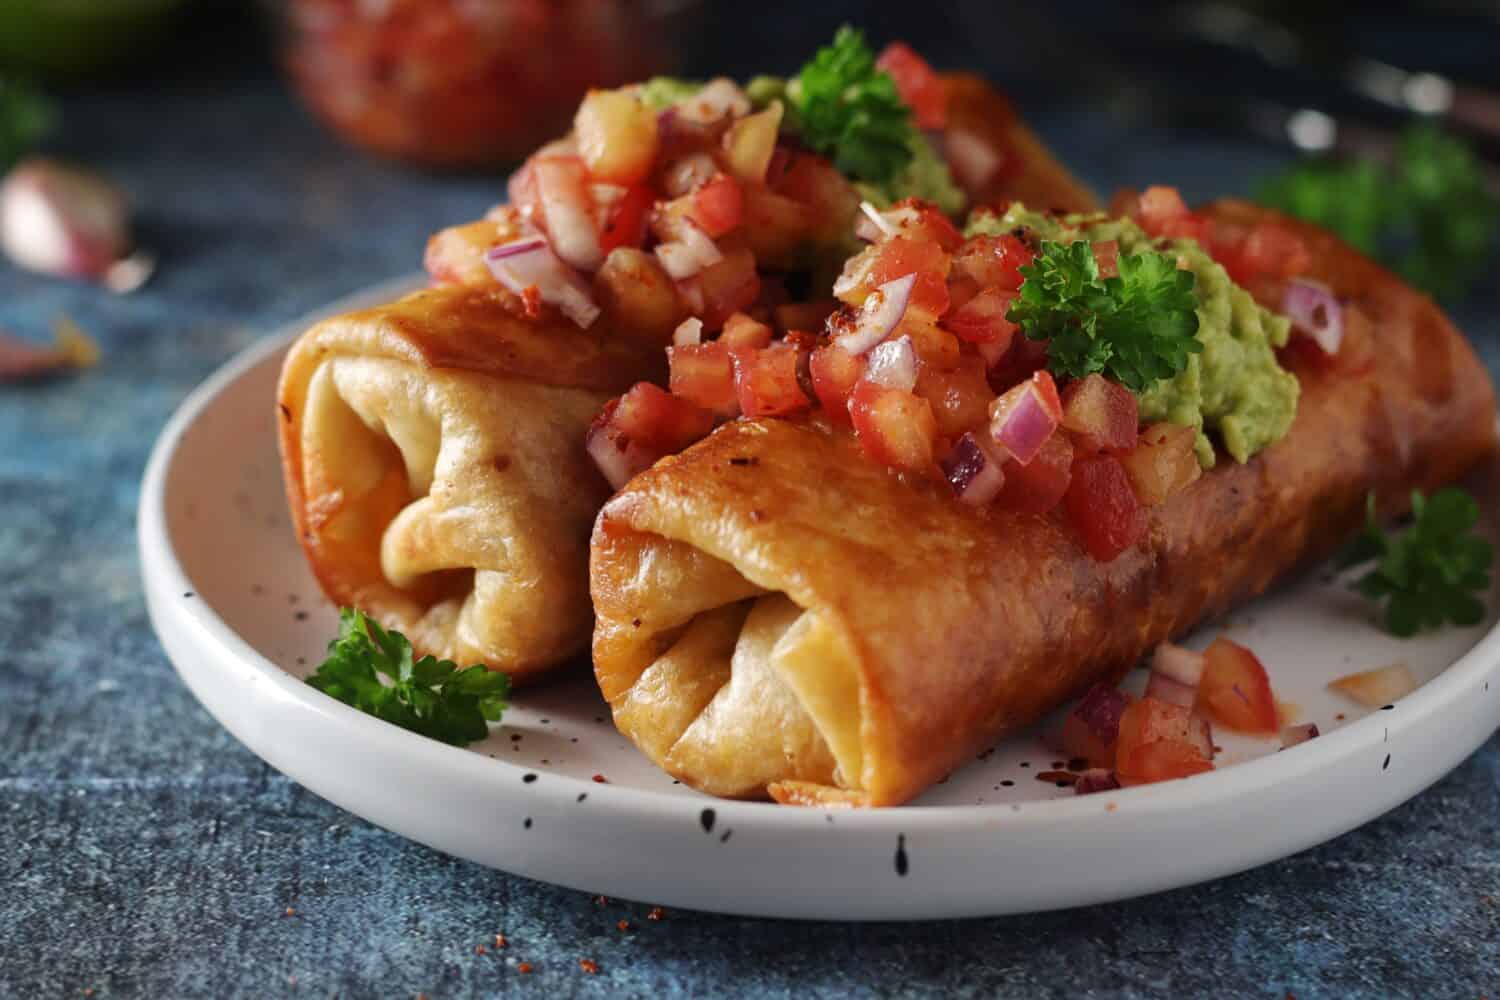 A typical dish of Mexican cuisine - Chimichanga, made of tortilla with different ingredients	